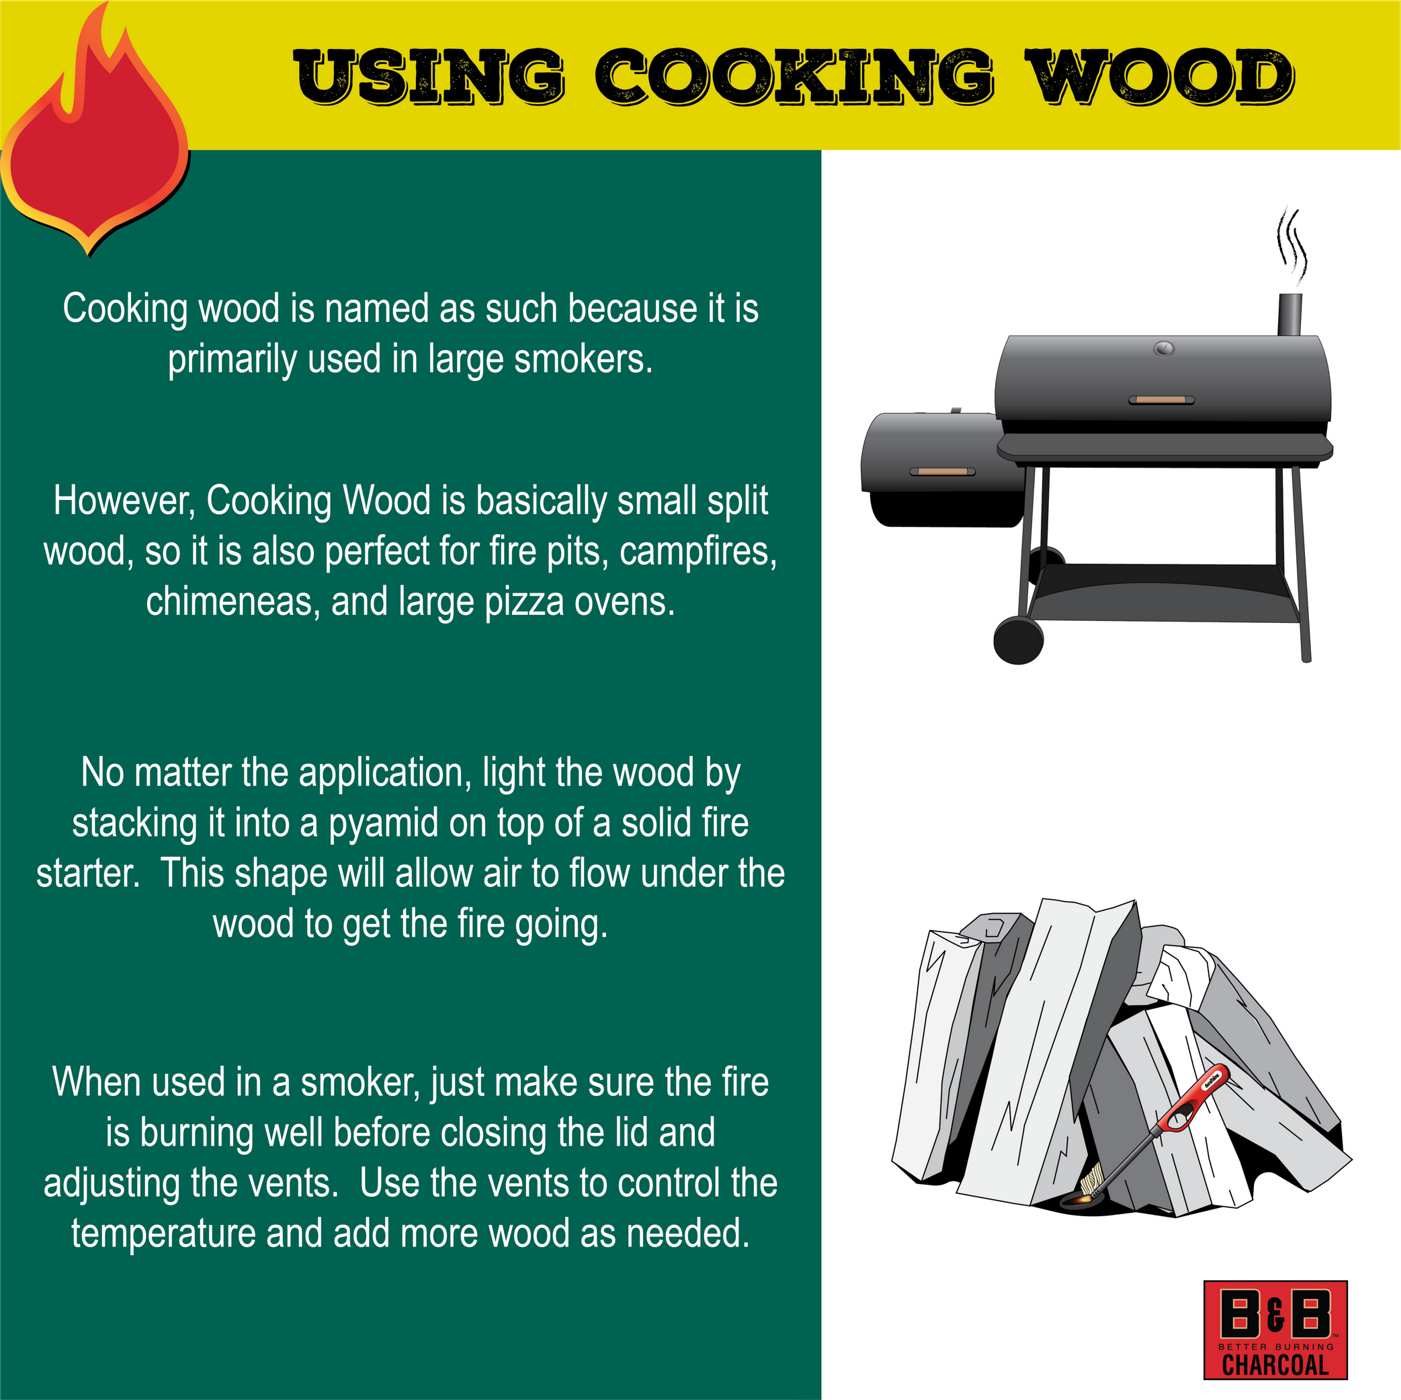 B&B Charcoal Hickory Cooking Wood; image 4 of 4